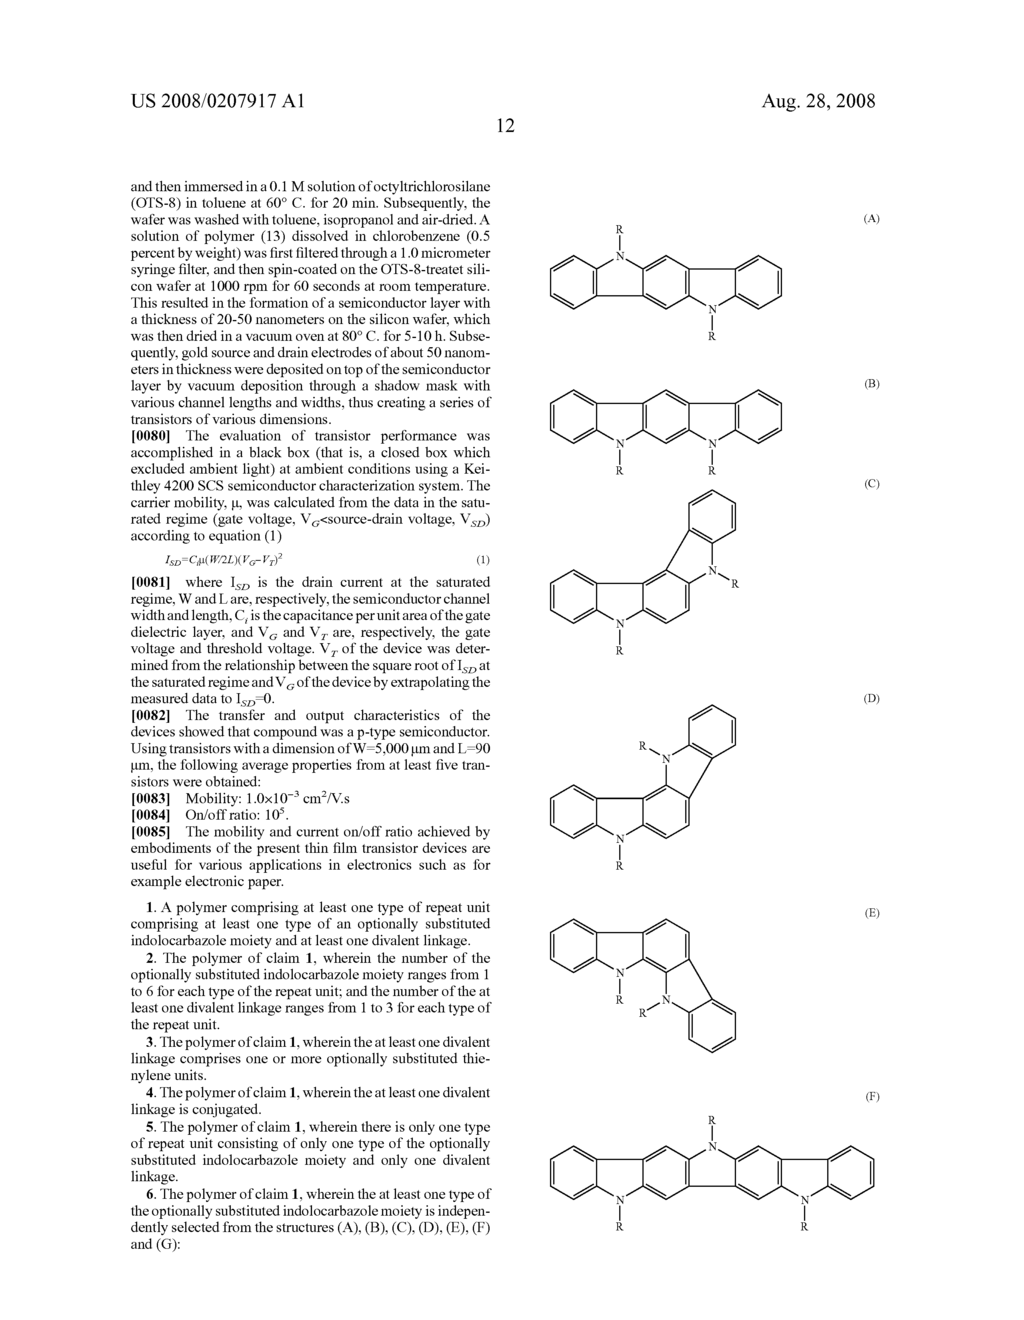 POLYMER HAVING INDOLOCARBAZOLE MOIETY AND DIVALENT LINKAGE - diagram, schematic, and image 15